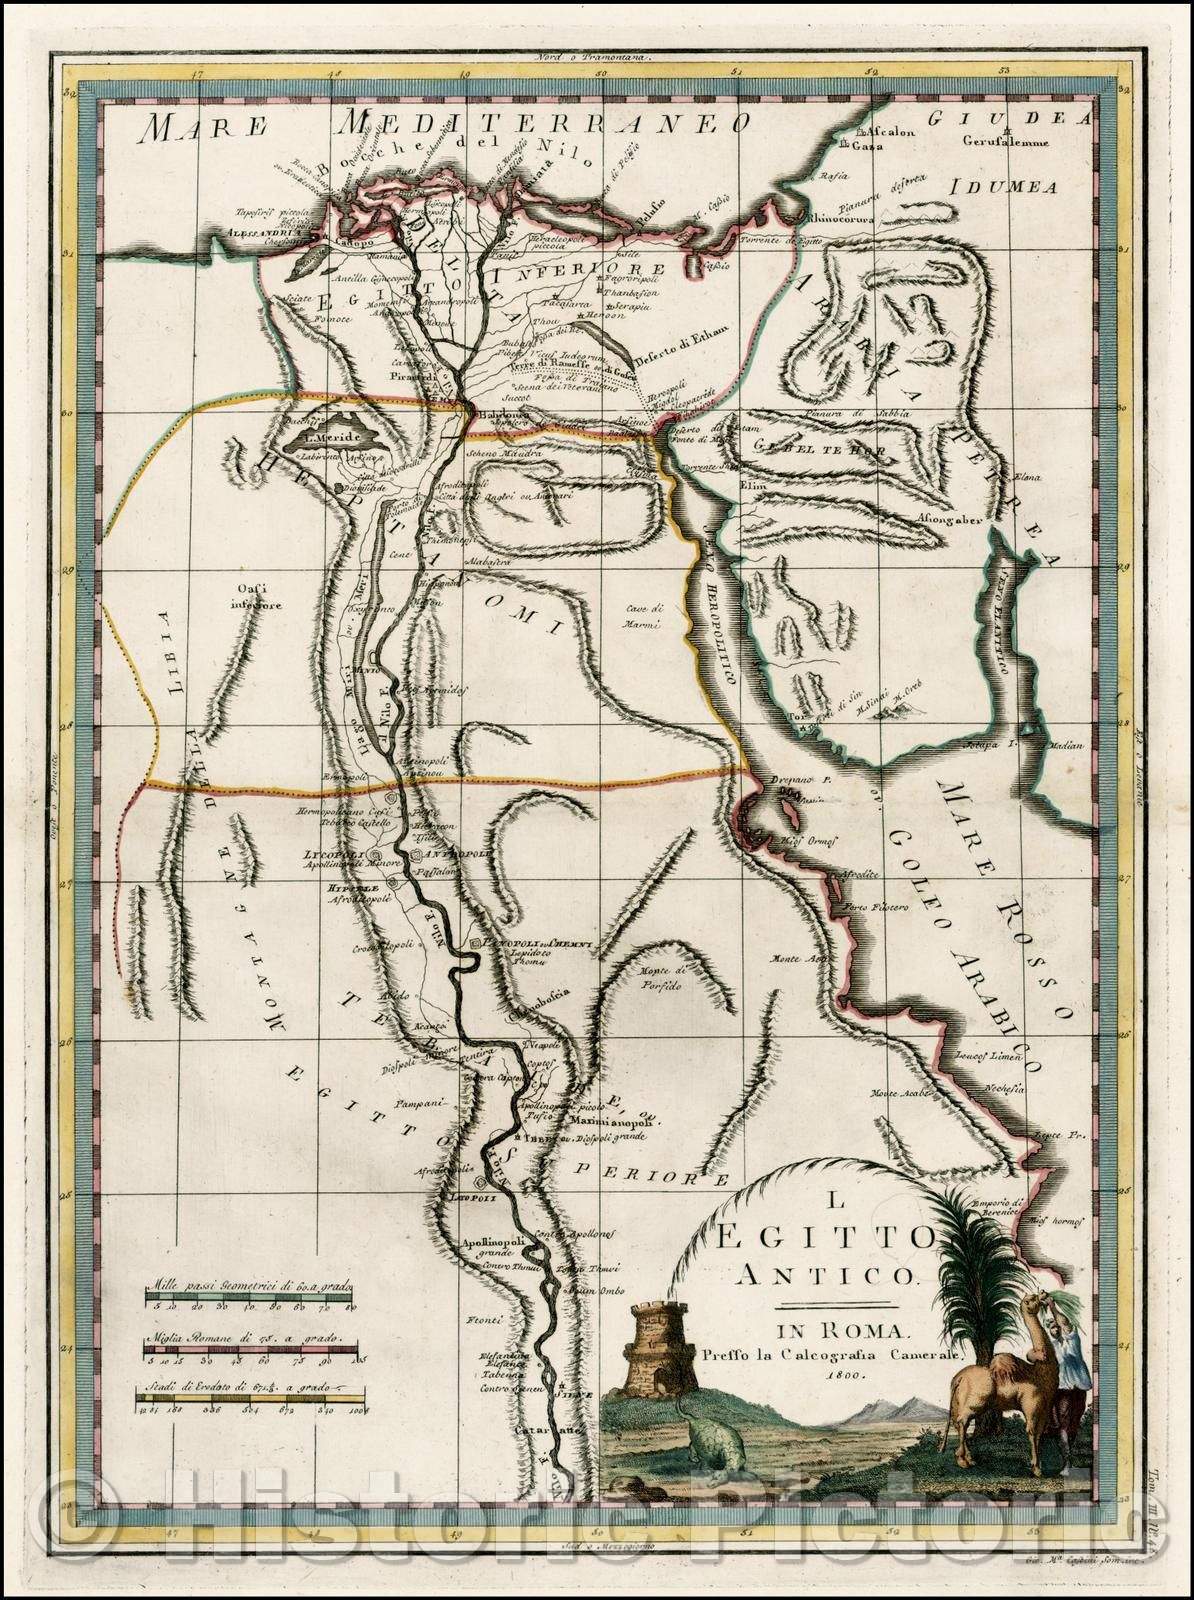 Historic Map - L Egitto Antico/Map of Egypt from the Red Sea and Nubian Desert to the Mediterranean, 1797, Giovanni Maria Cassini - Vintage Wall Art